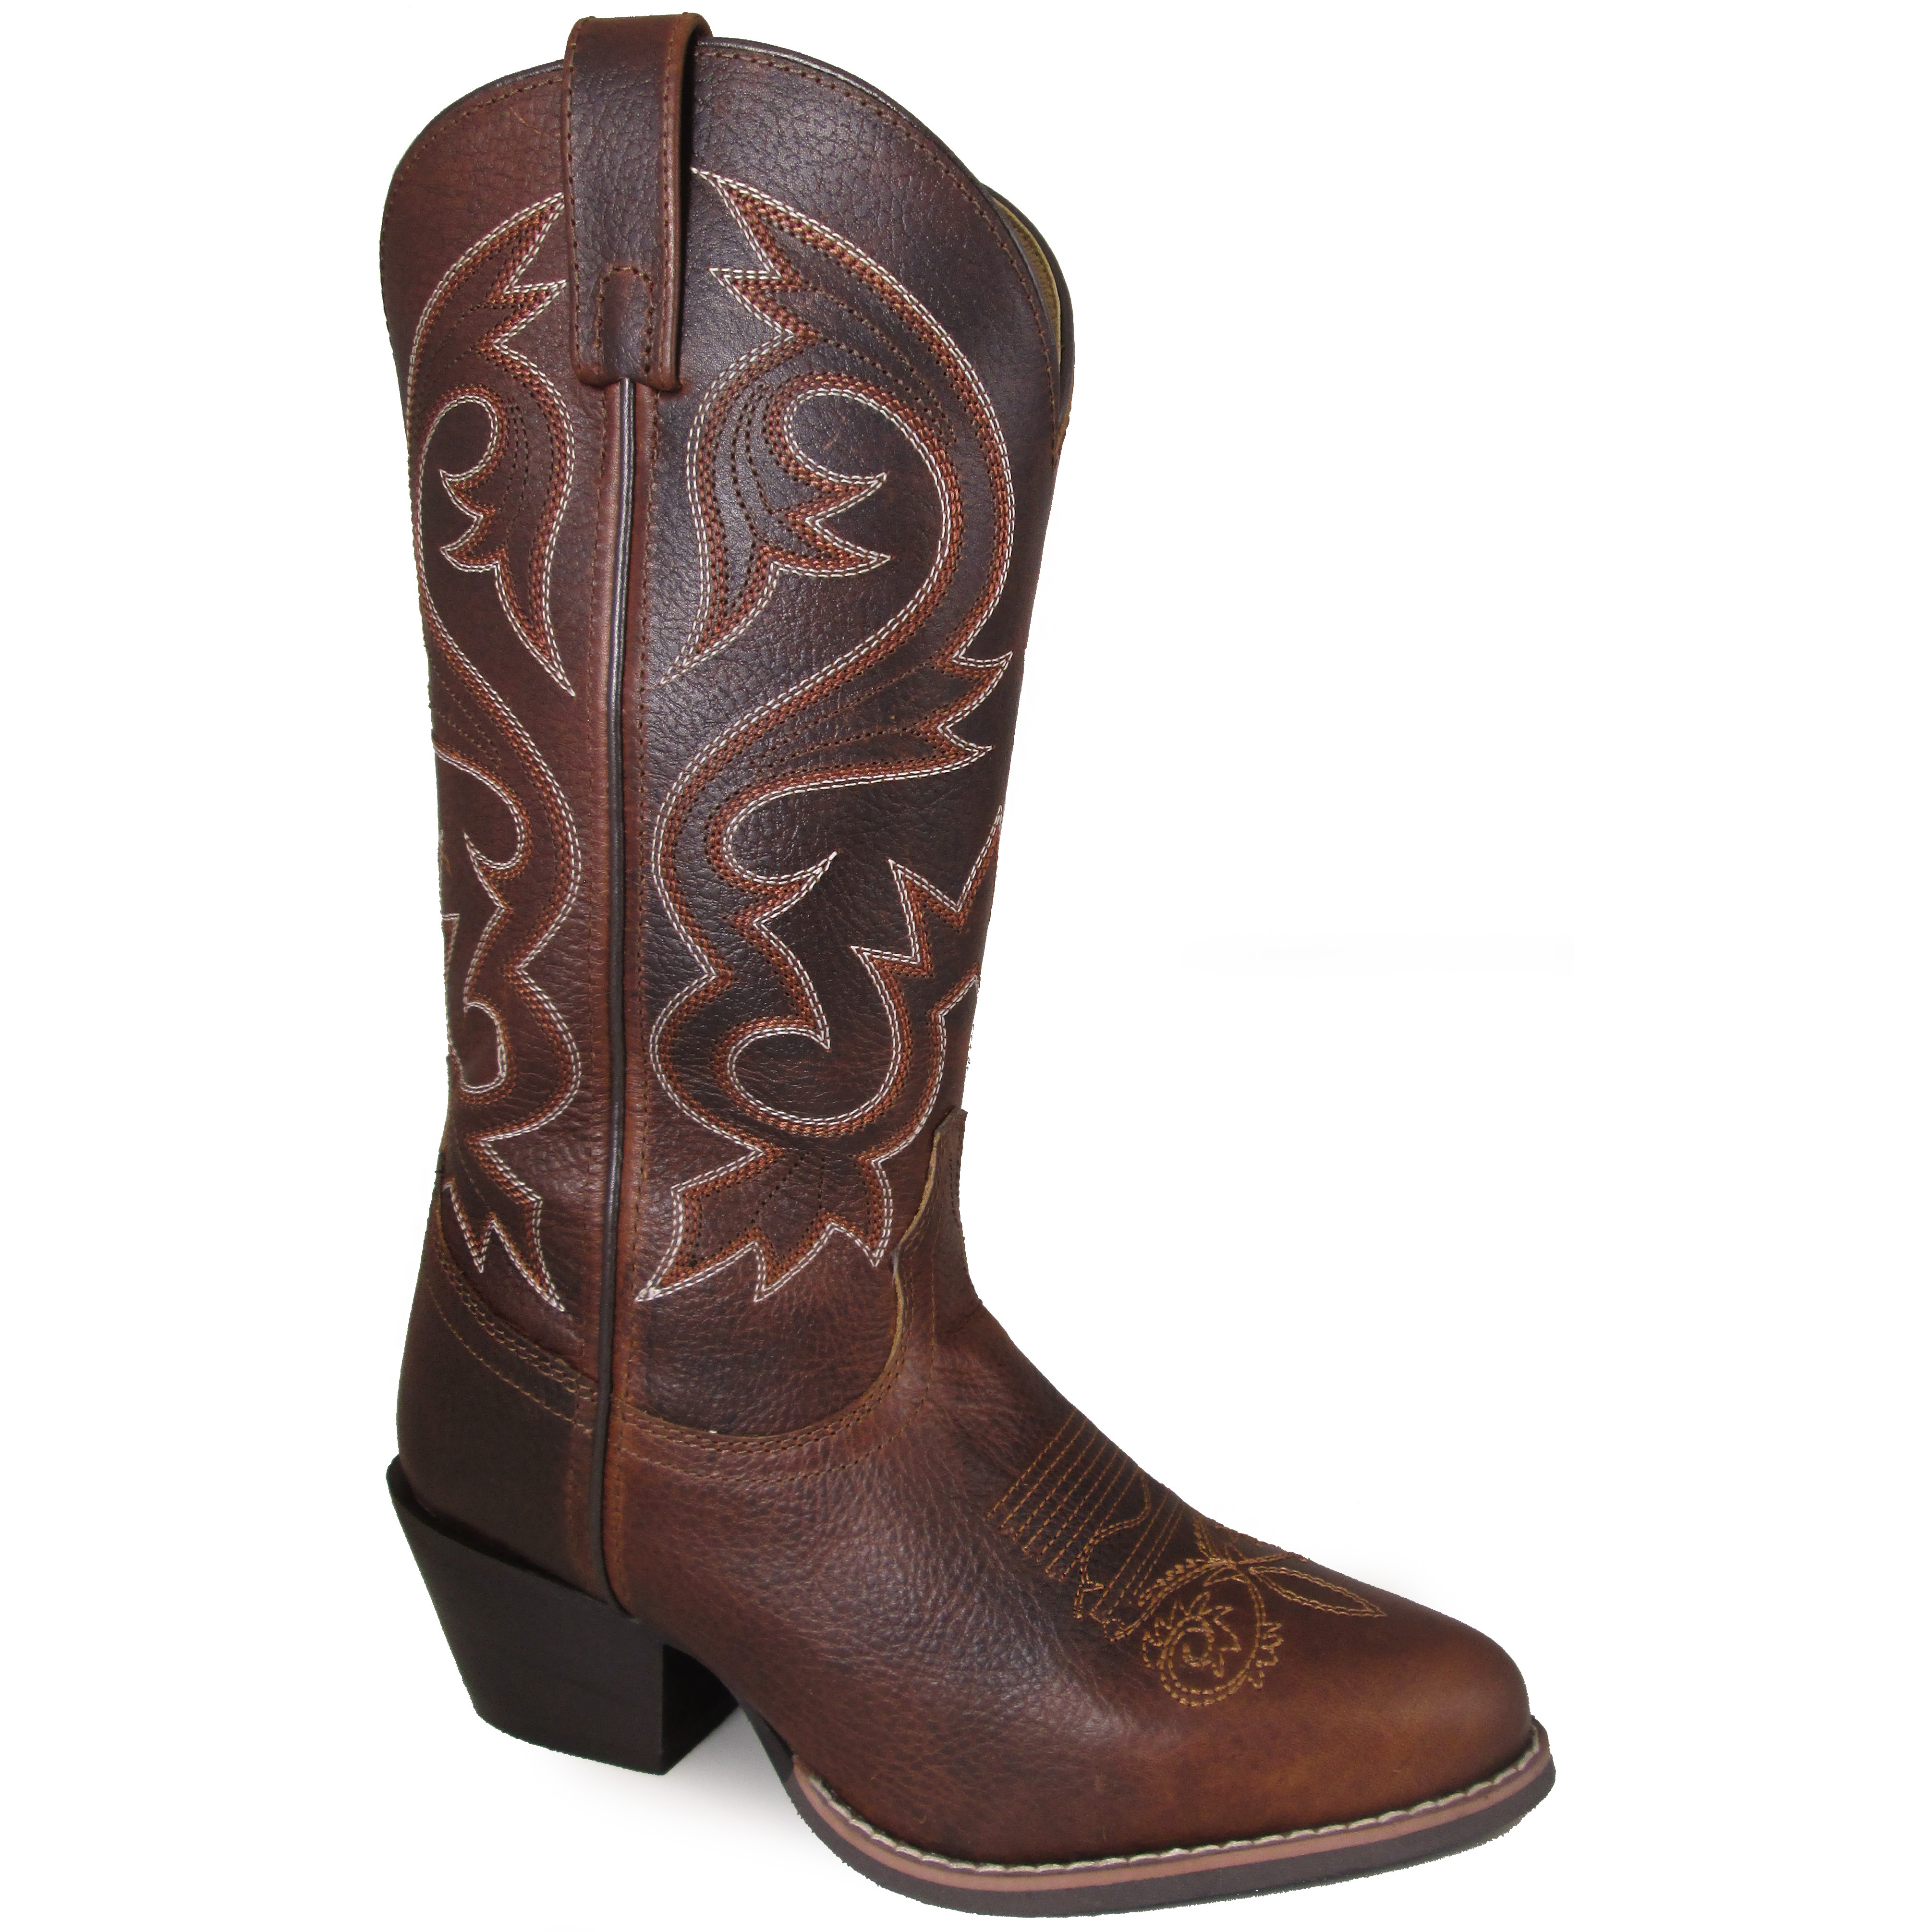 Smoky Mountain Boots Women's Redbud 12" Reddish Brown Leather Cowboy Boot